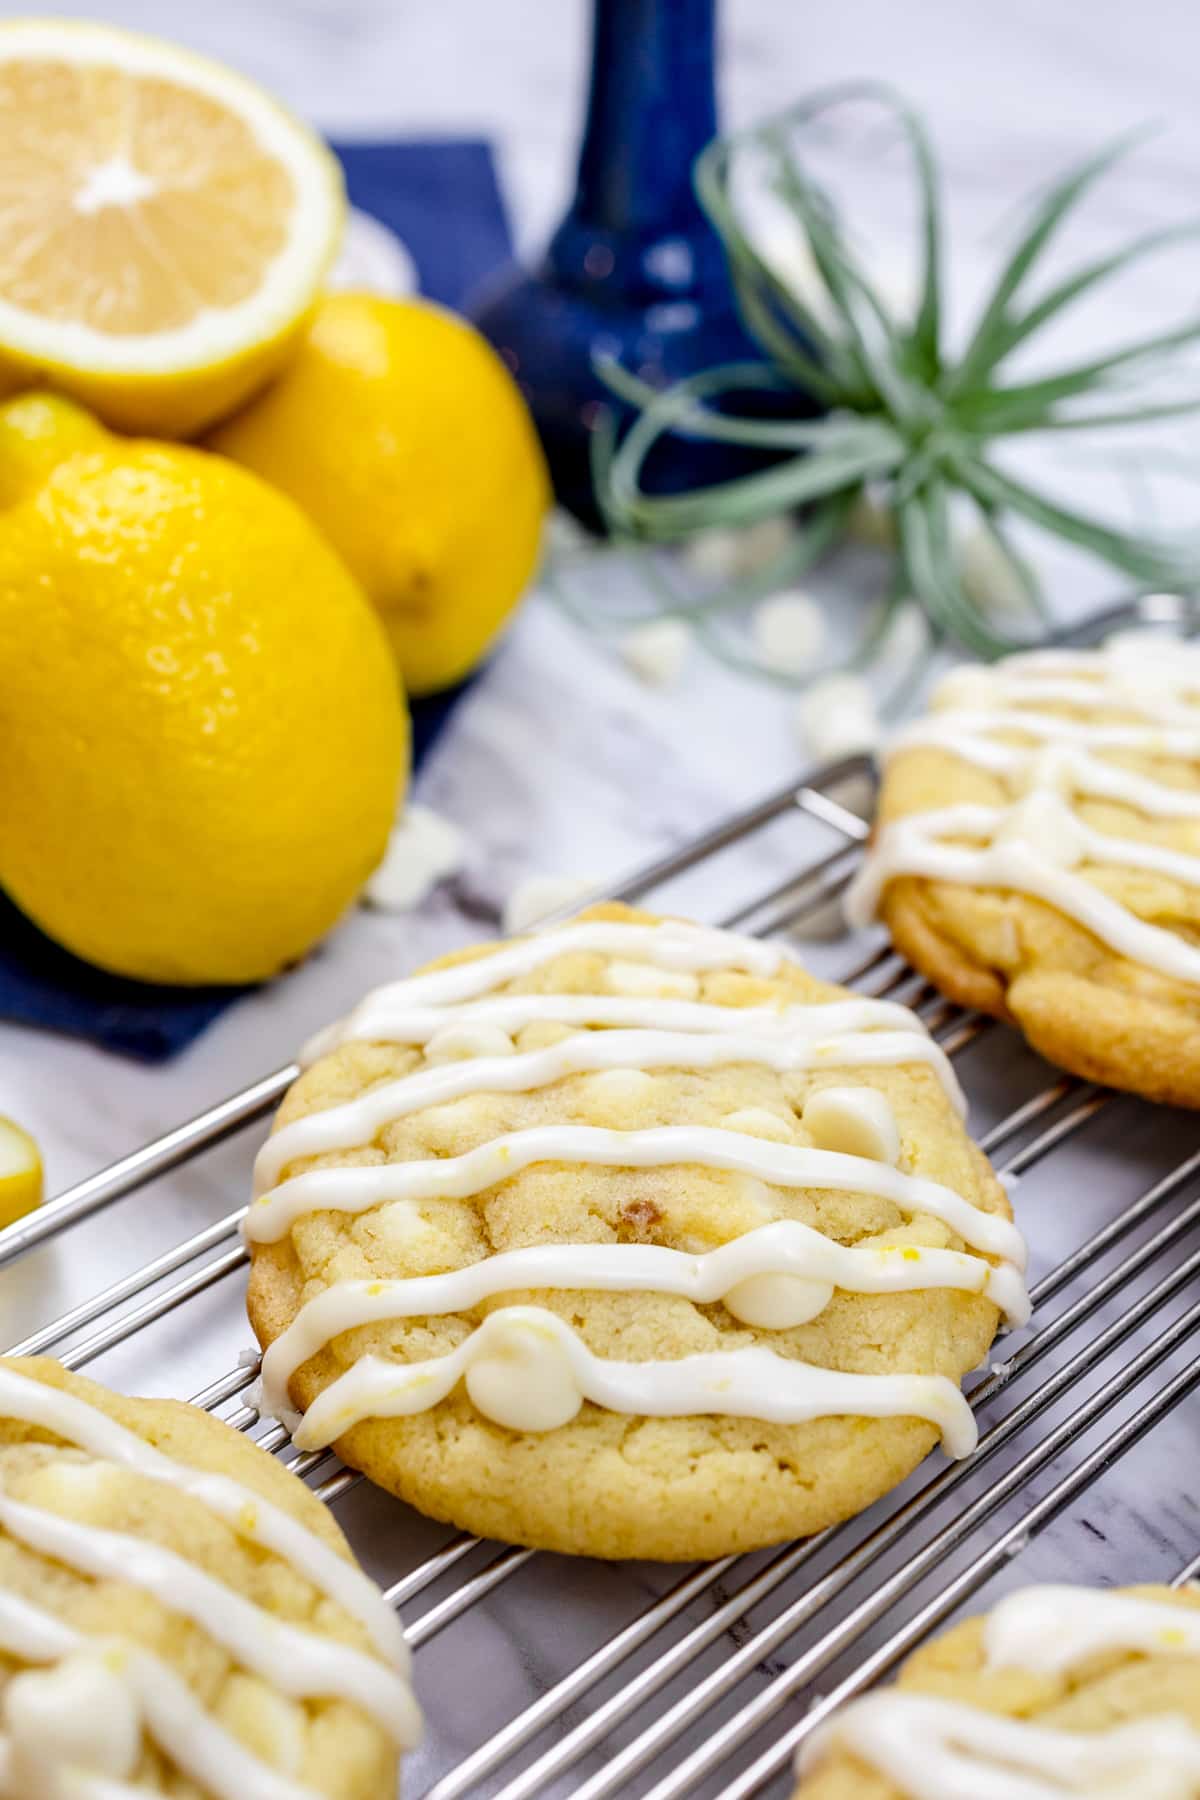 Lemon white chooclate chip cookies on a wire rack next to some lemons. 